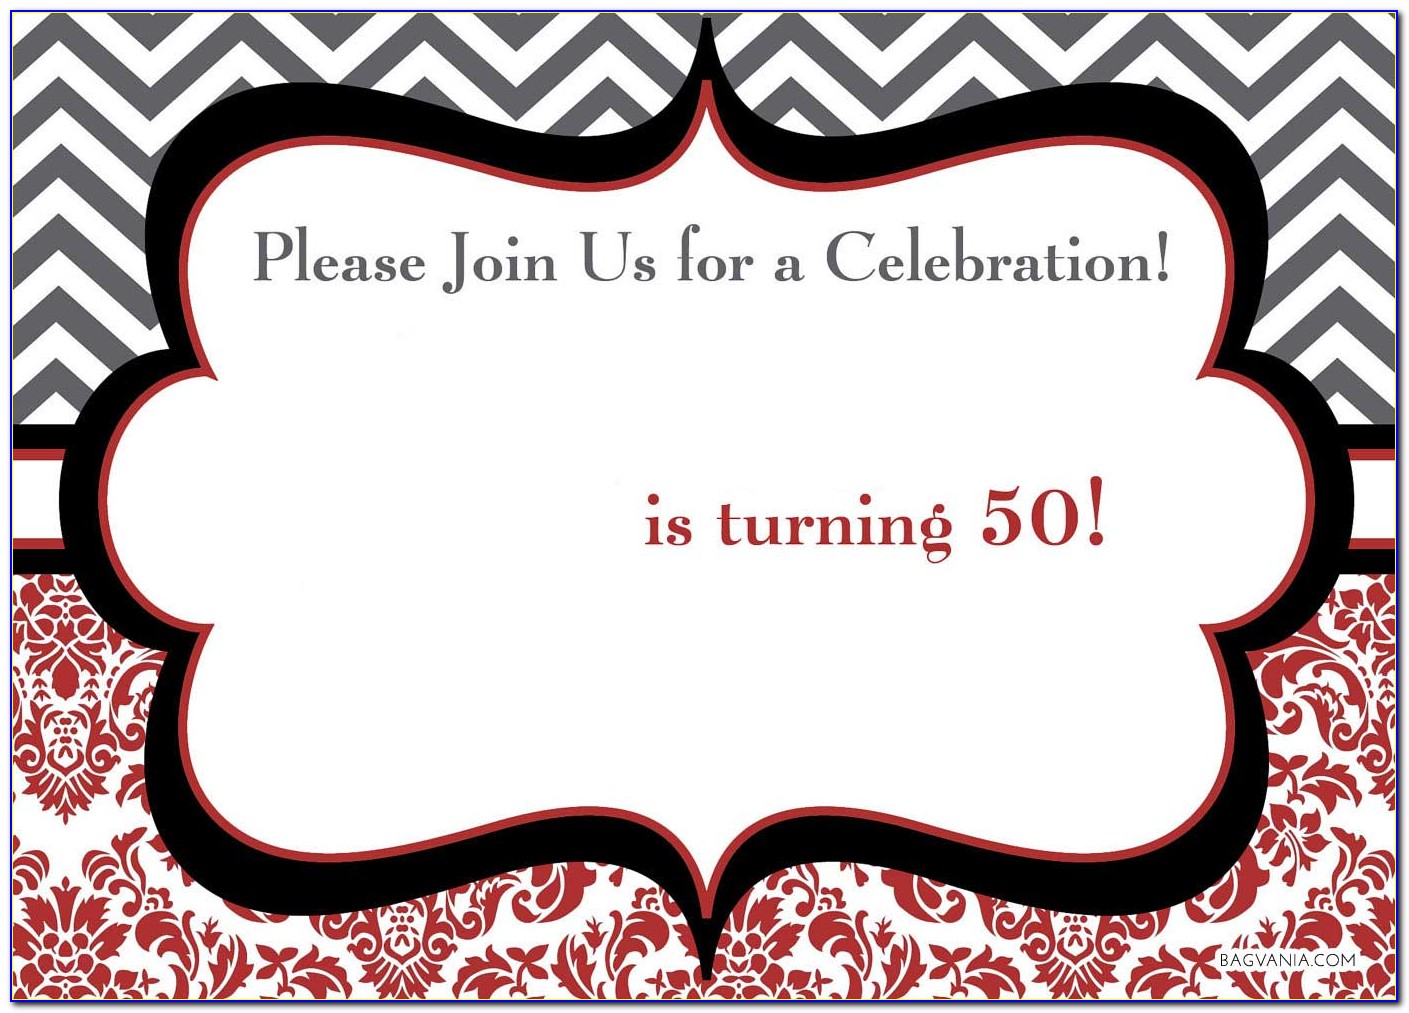 50 Th Anniversary Powerpoint Templates Free